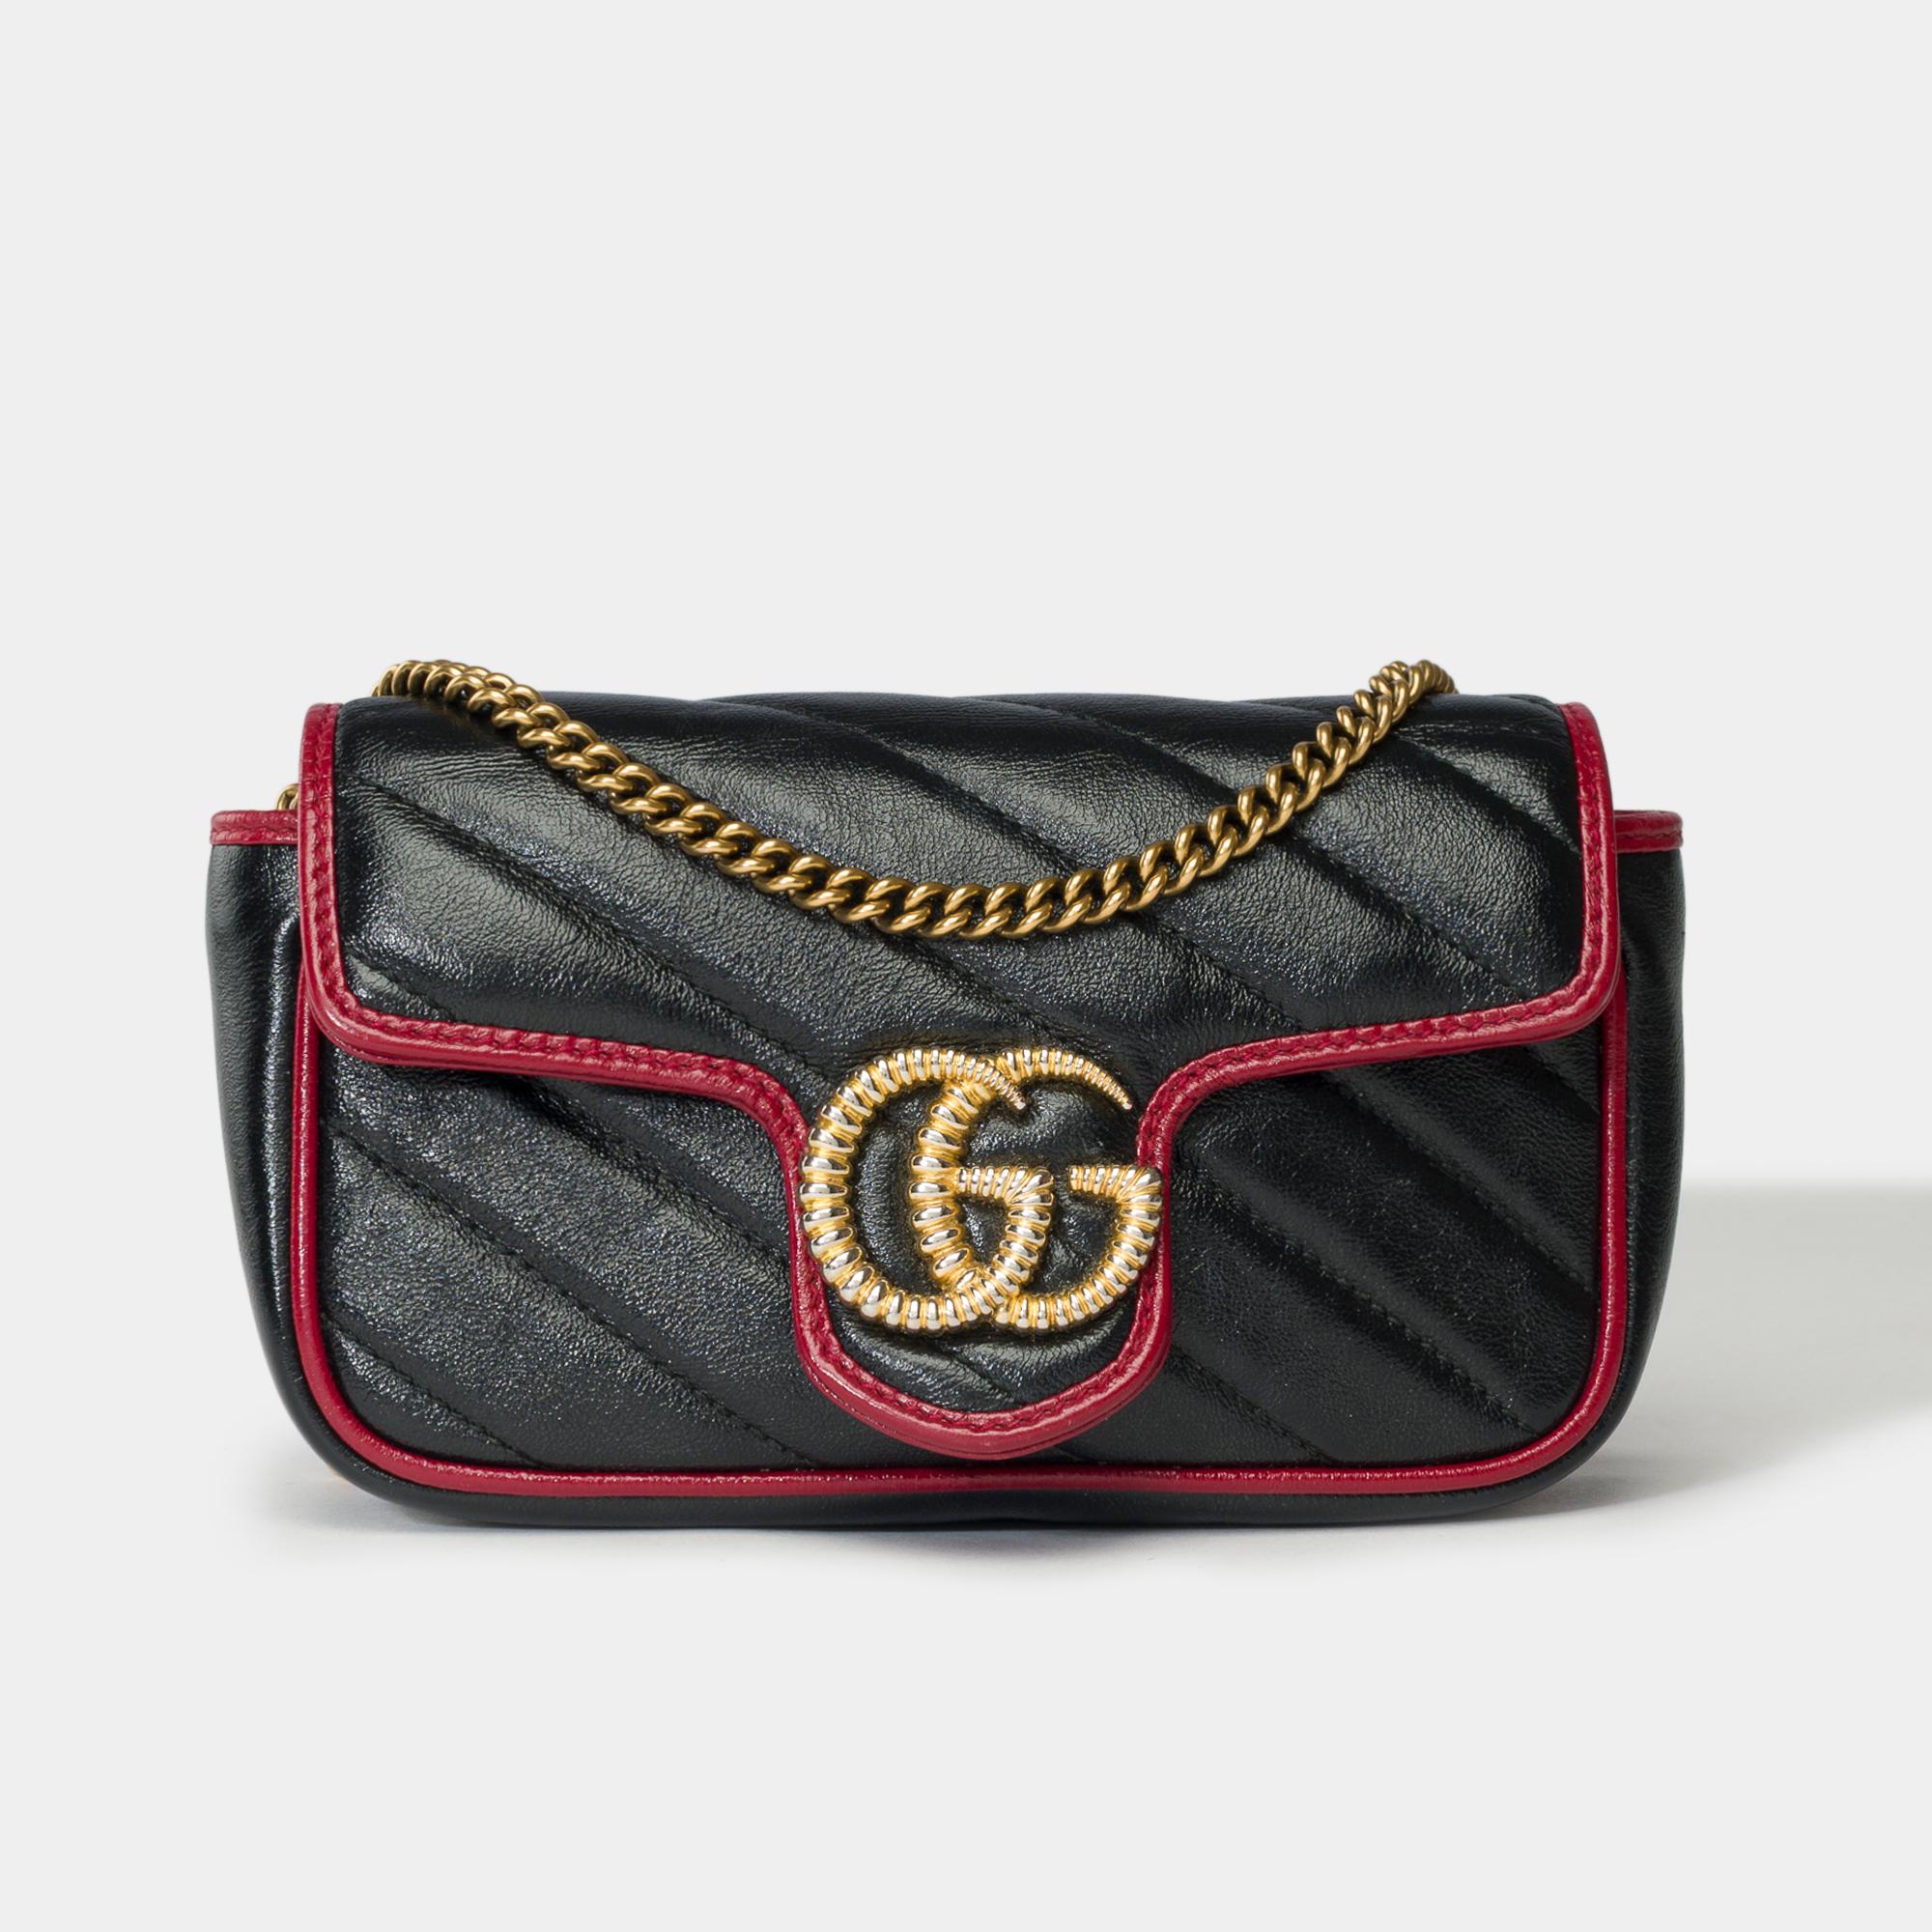 Elegant​ ​Gucci​ ​GG​ ​Marmont​ ​shoulder​ ​bag​ ​in​ ​black​ ​quilted​ ​leather​ ​and​ ​red​ ​leather,​ ​gold​ ​metal​ ​trim,​ ​chain​ ​handle​ ​convertible​ ​in​ ​gold​ ​metal​ ​allowing​ ​a​ ​carry​ ​hand​ ​or​ ​shoulder​ ​or​ ​crossbody​